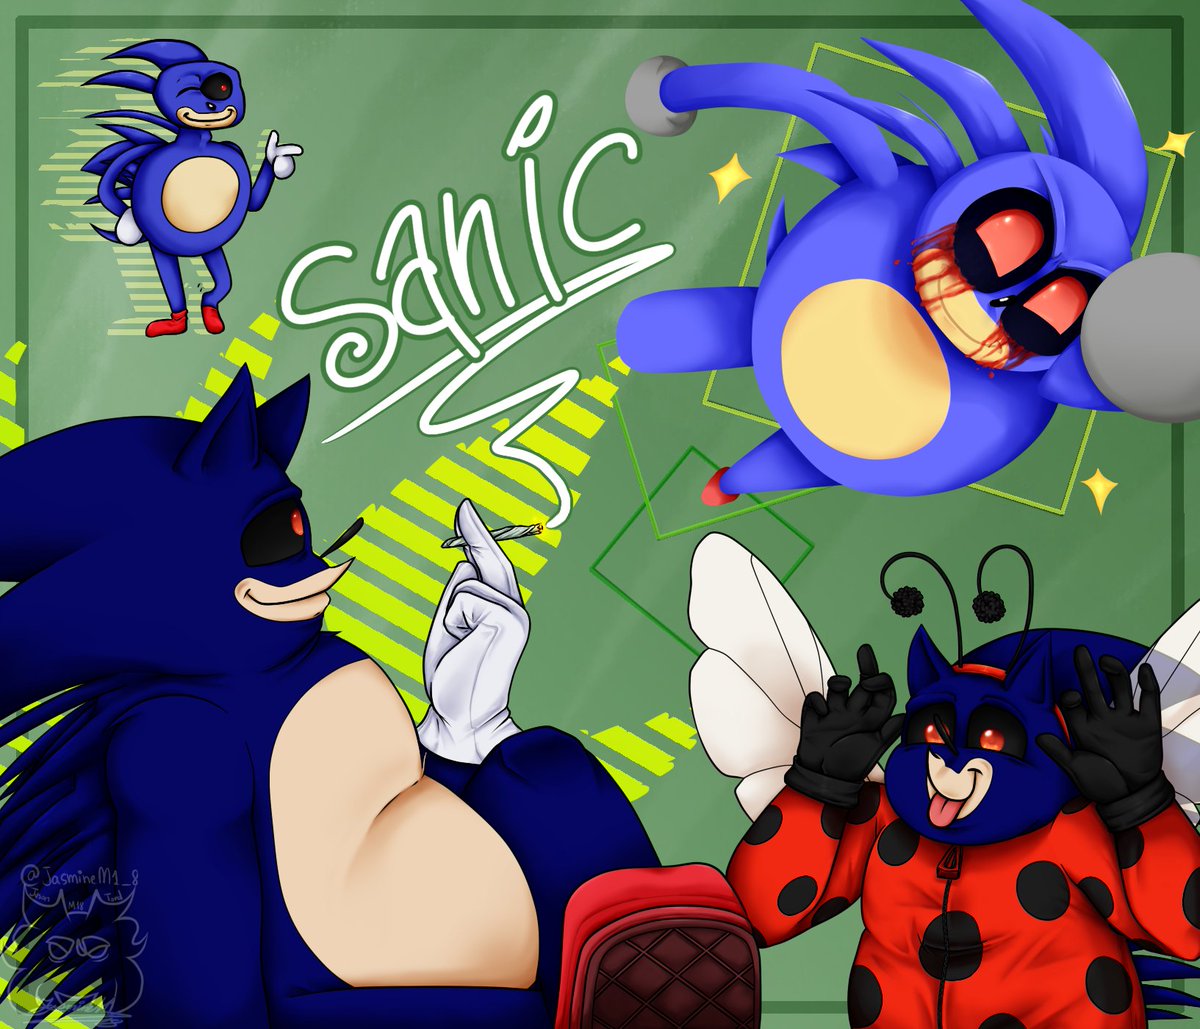 Sanic da m3m3 h3dg3h0g

This was made for @s4niceexe 's sanic tweet
also a chance to draw more of the homie #sanic

#sanicexe